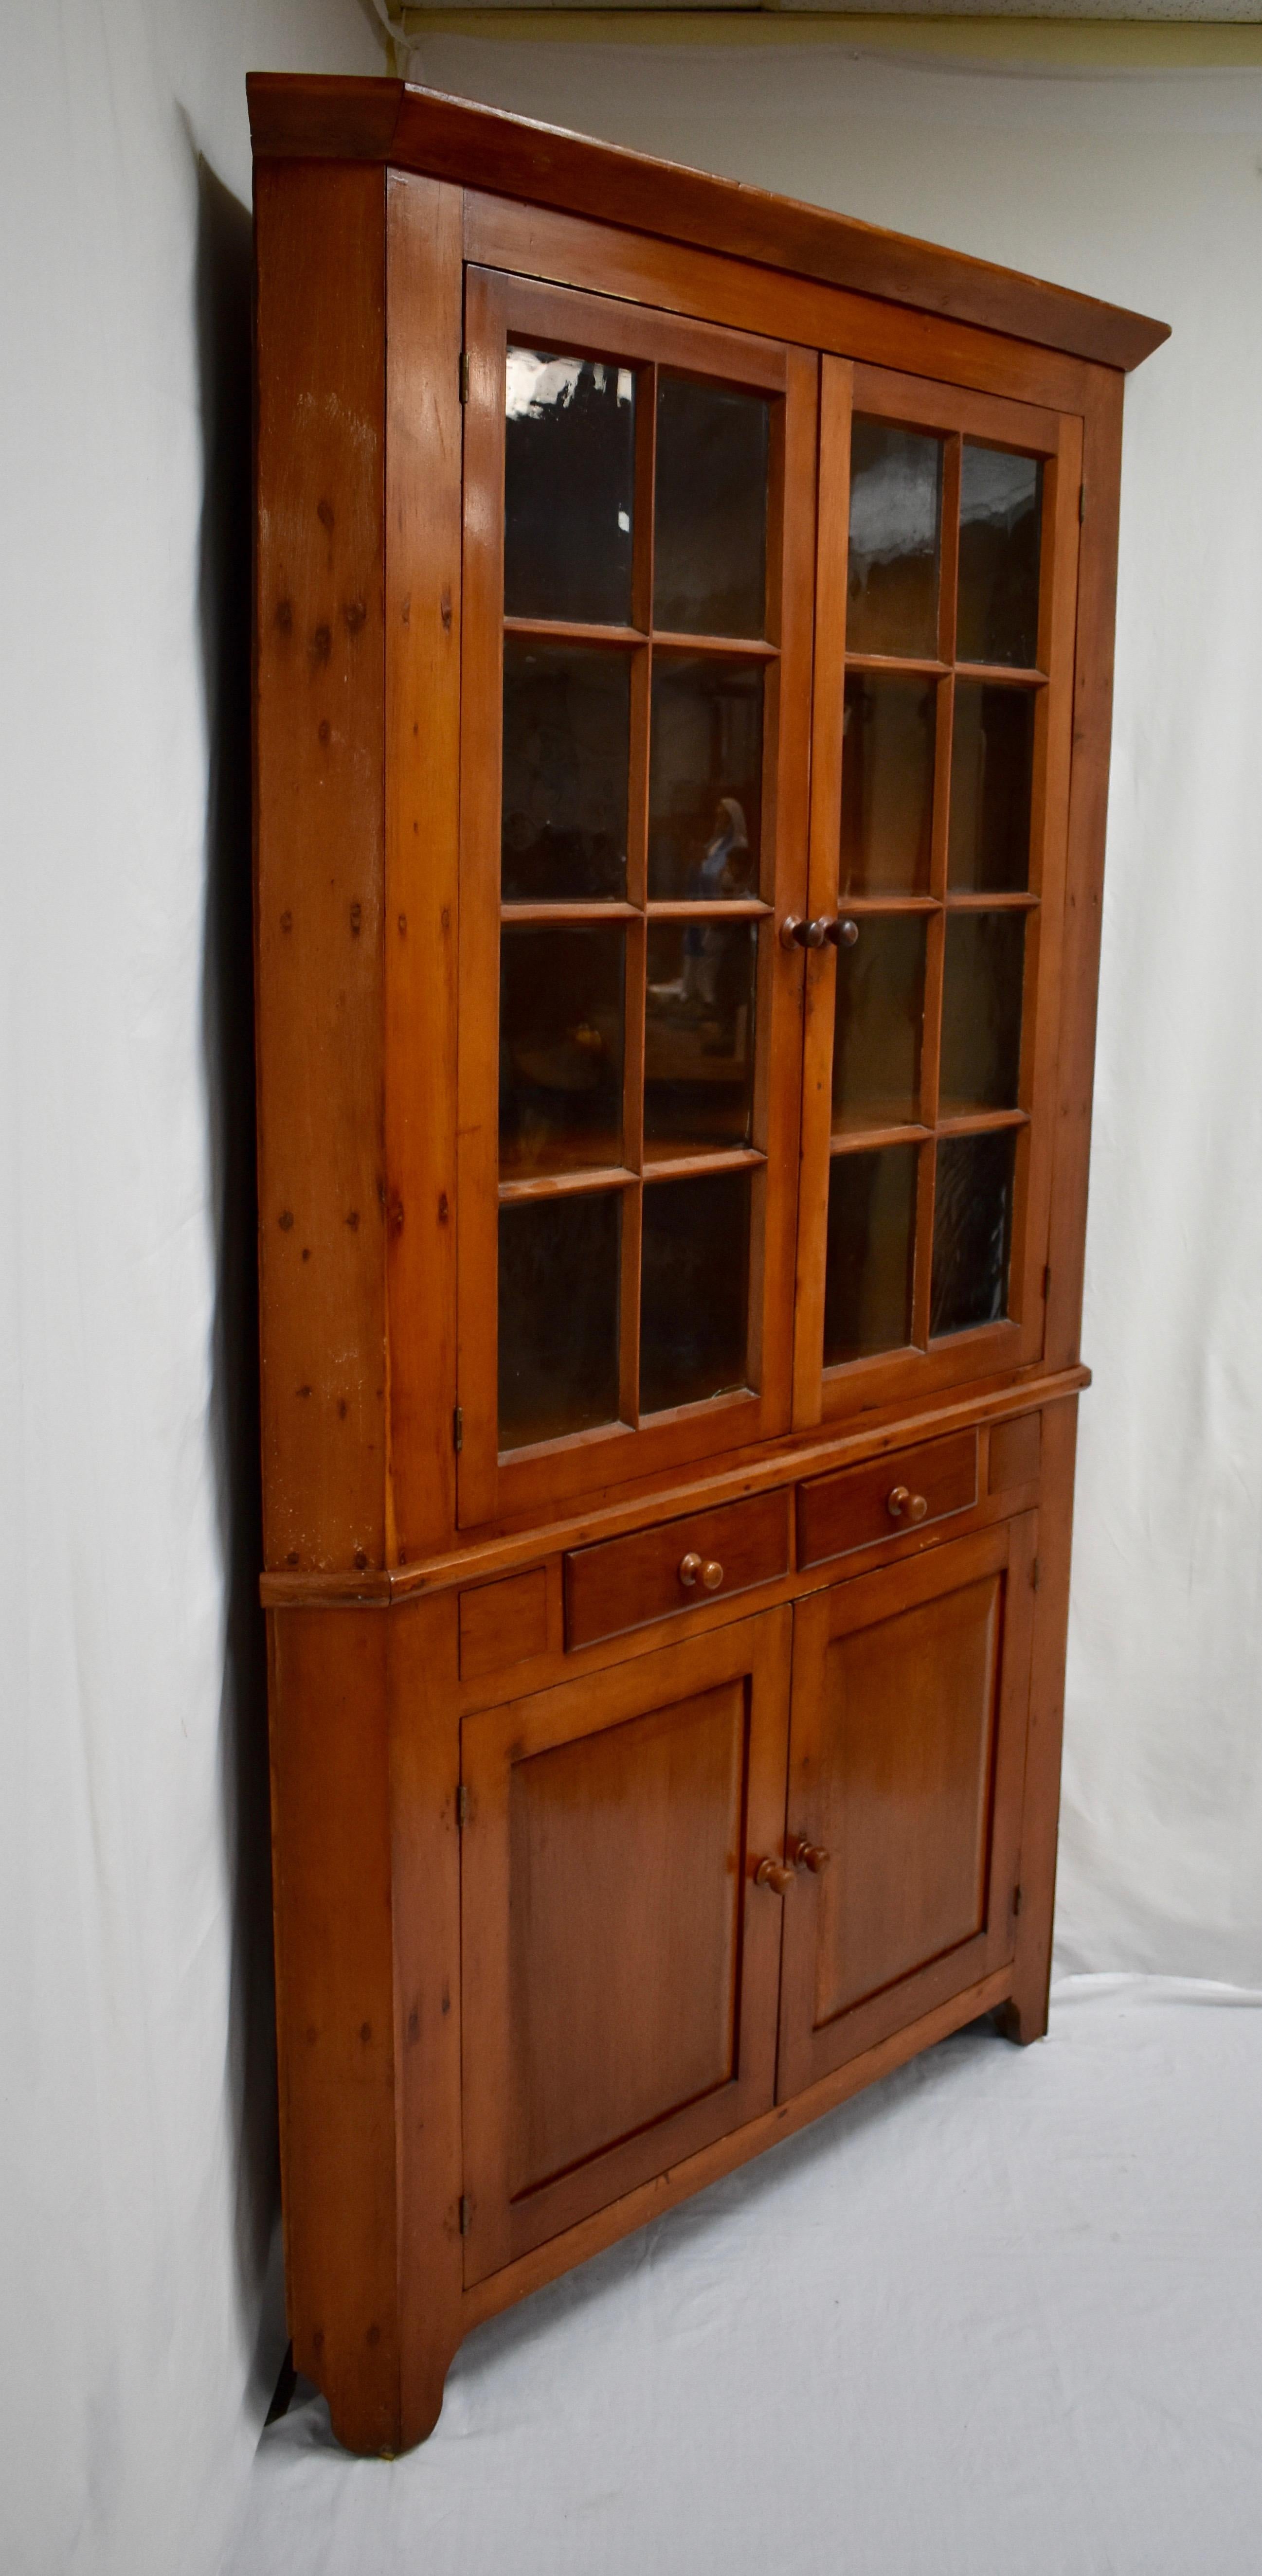 Built in two pieces, this imposing late 19th century cherrywood corner cupboard from Maryland affords spacious storage and display using only 35” each side of a corner. The upper section has a plain crown and two wide-swinging doors, each with eight